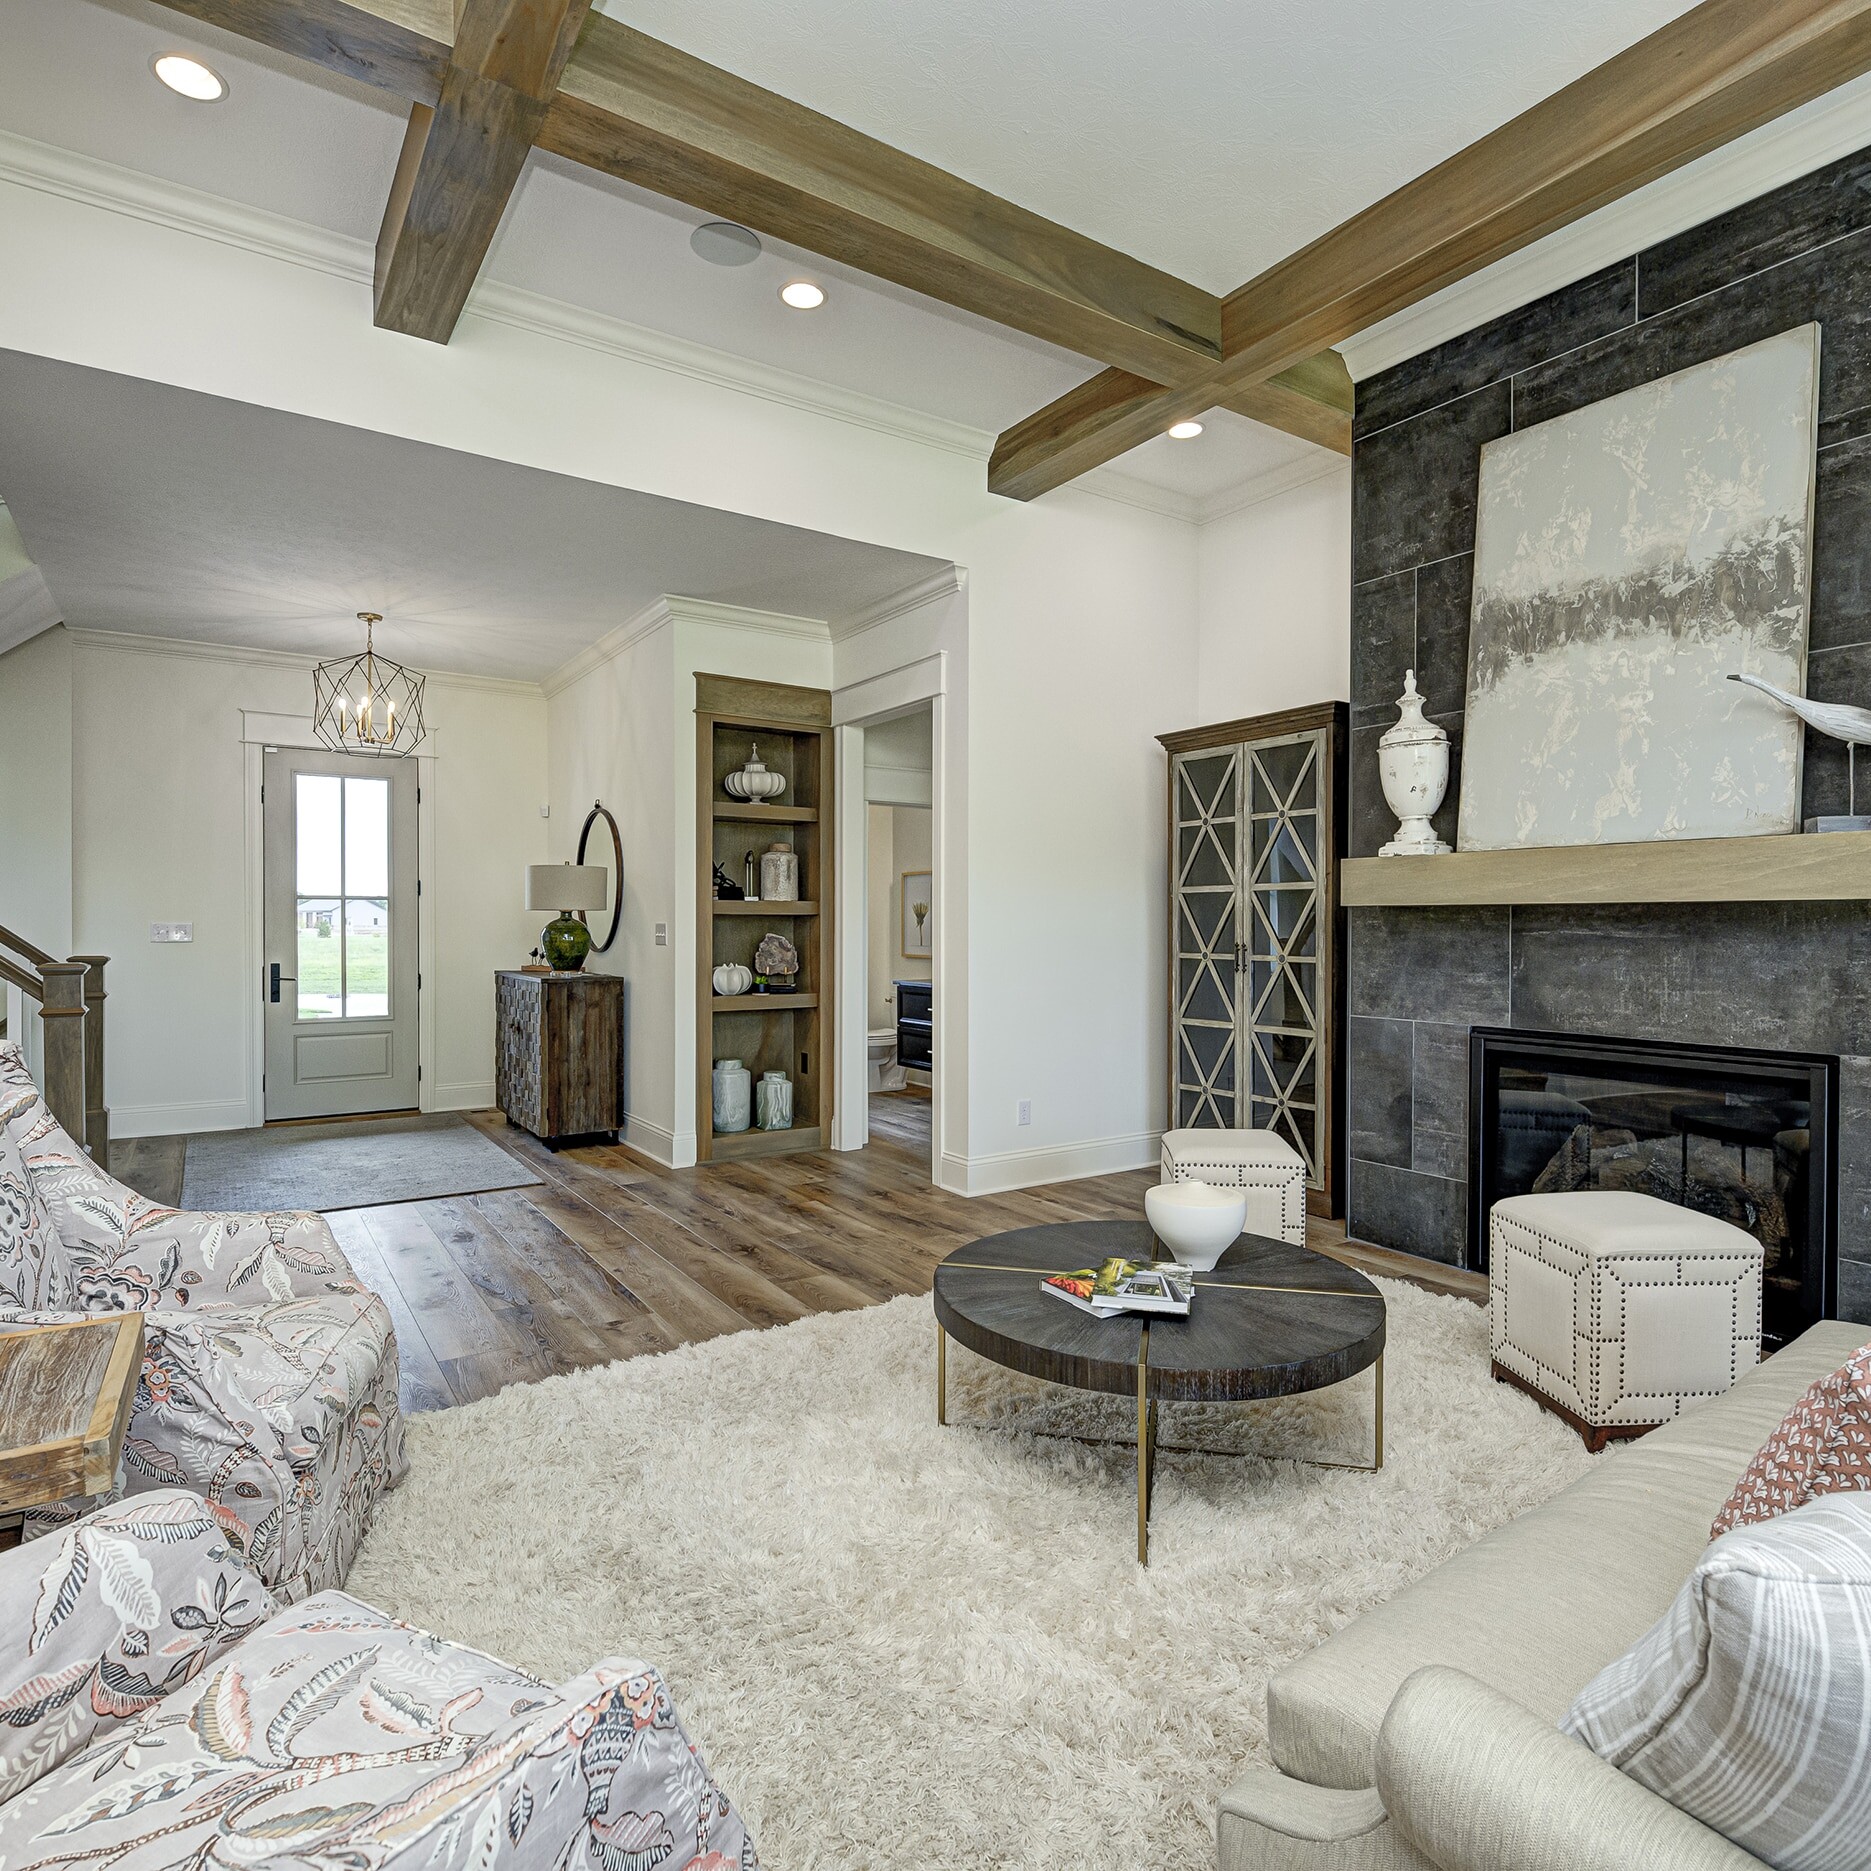 A living room with a stone fireplace and wood beams.